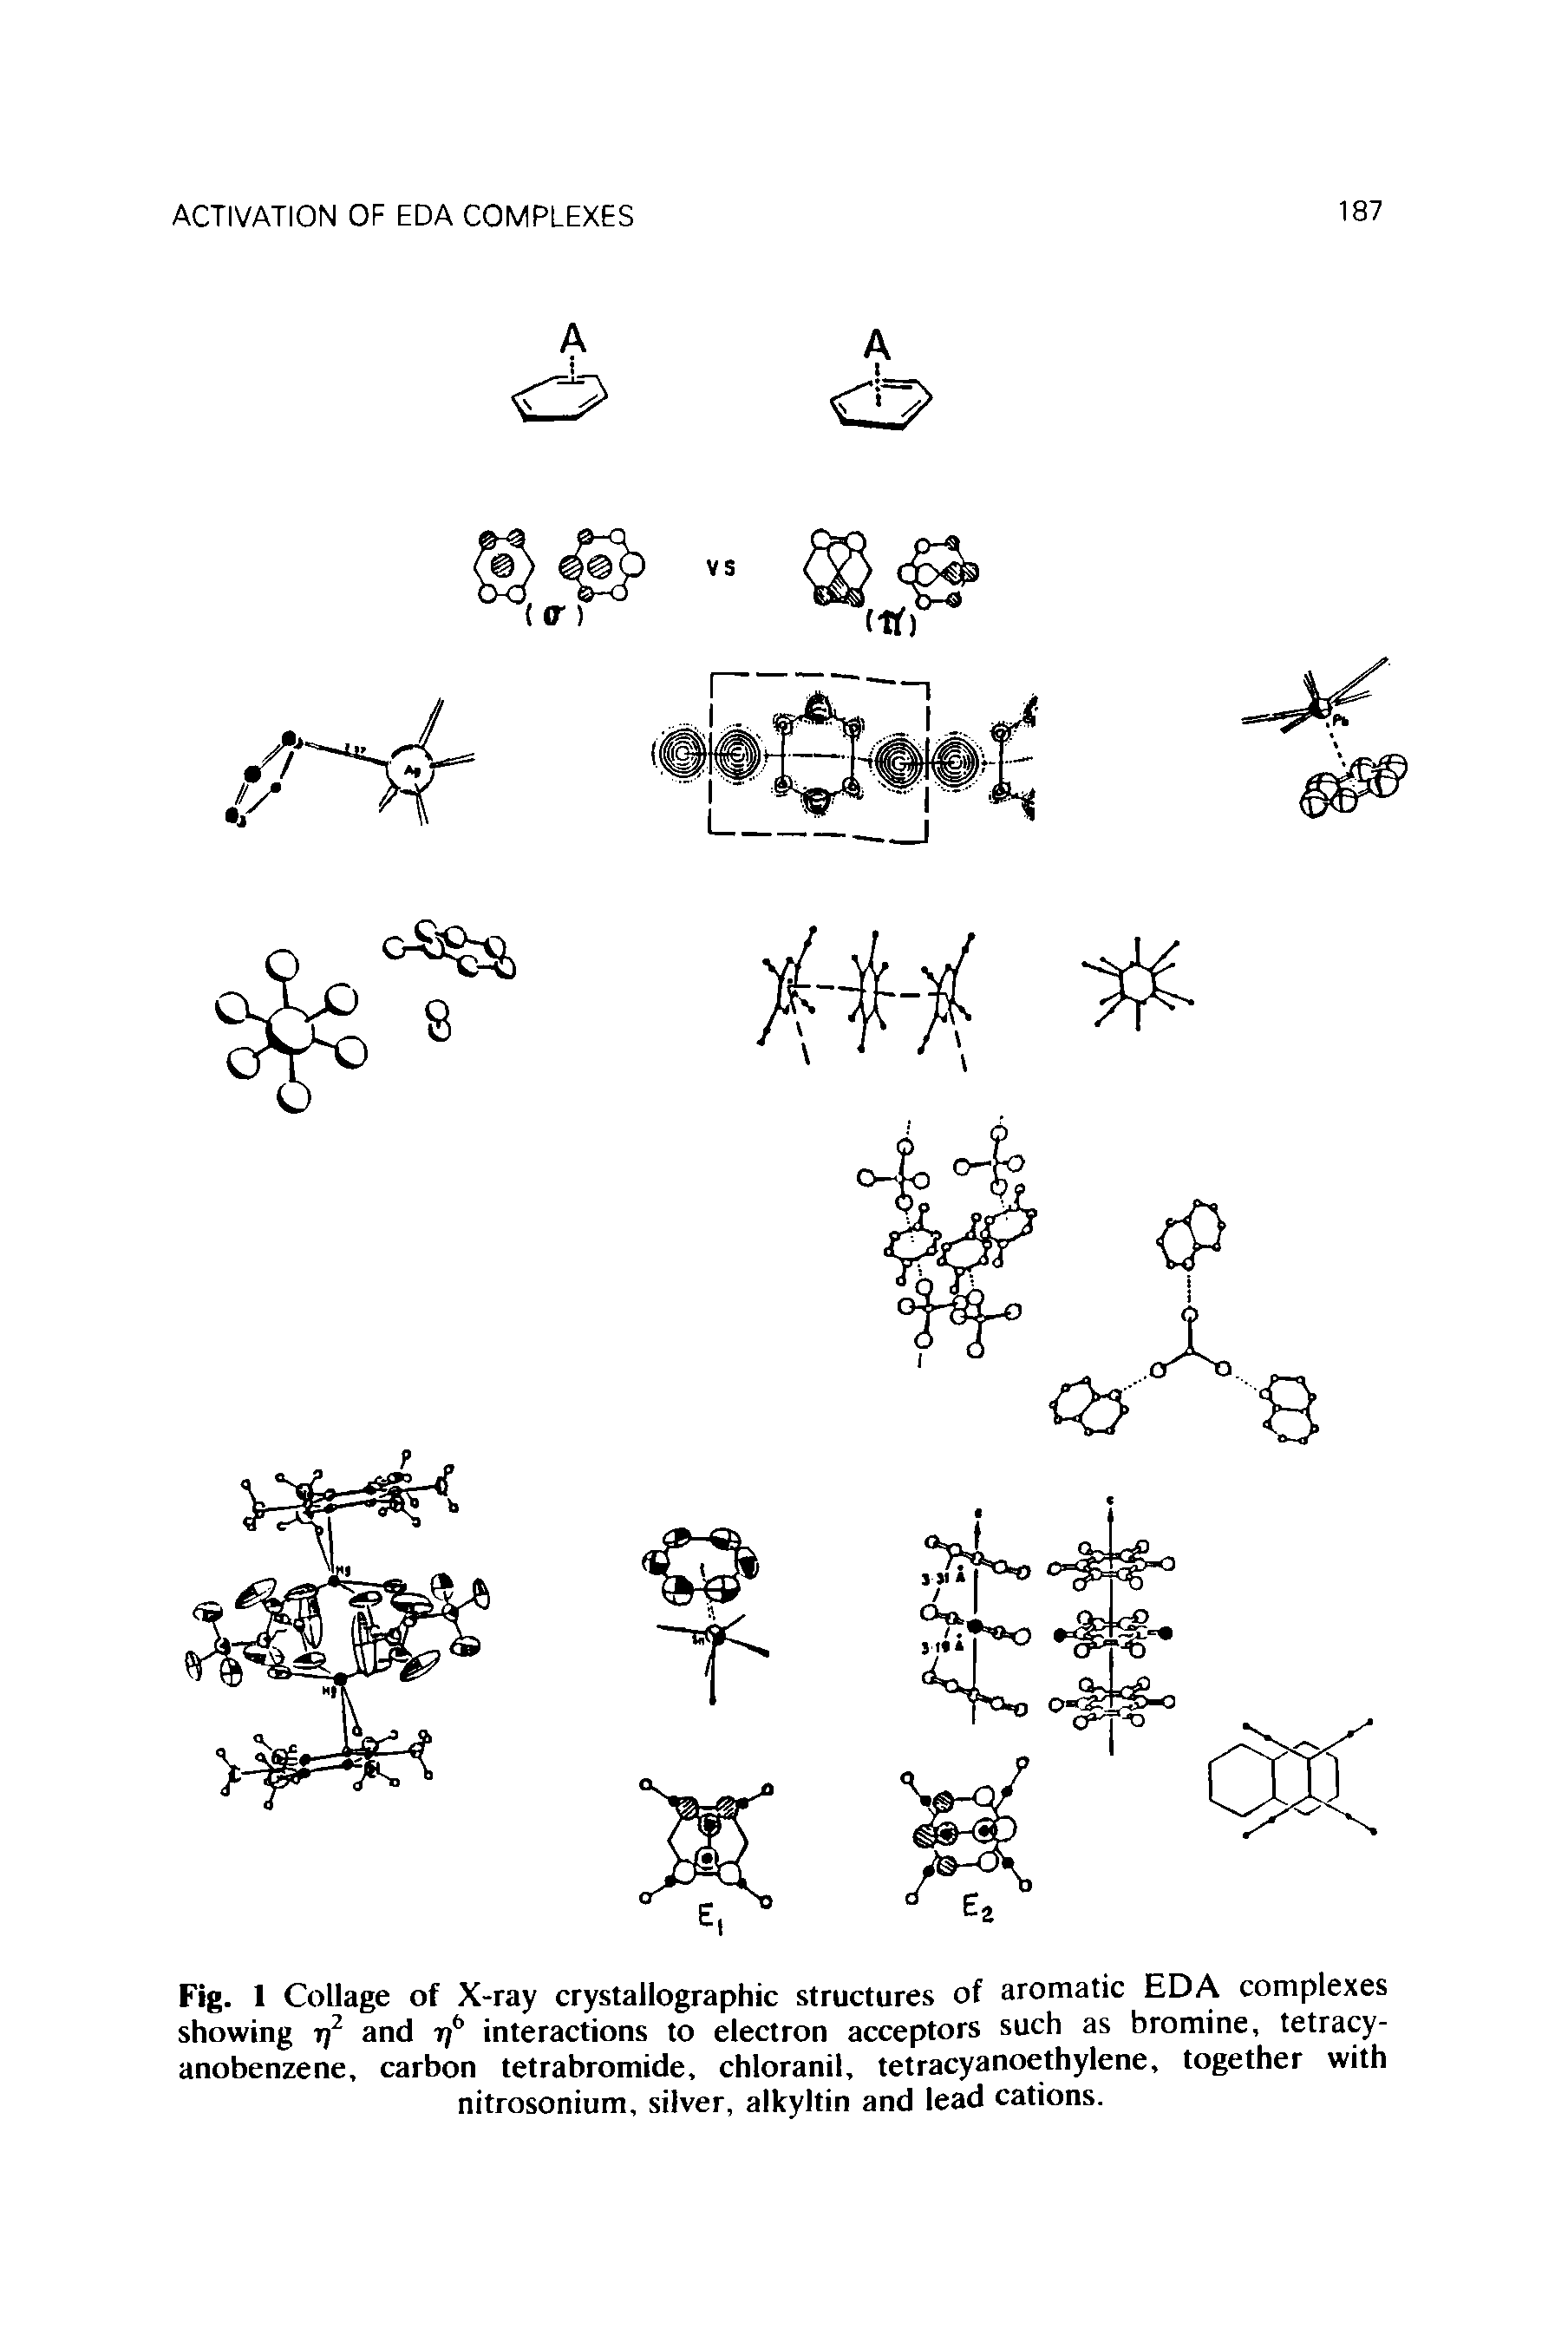 Fig. 1 Collage of X-ray crystallographic structures of aromatic EDA complexes showing t]2 and rf interactions to electron acceptors such as bromine, tetracy-anobenzene, carbon tetrabromide, chloranil, tetracyanoethylene, together with nitrosonium, silver, alkyltin and lead cations.